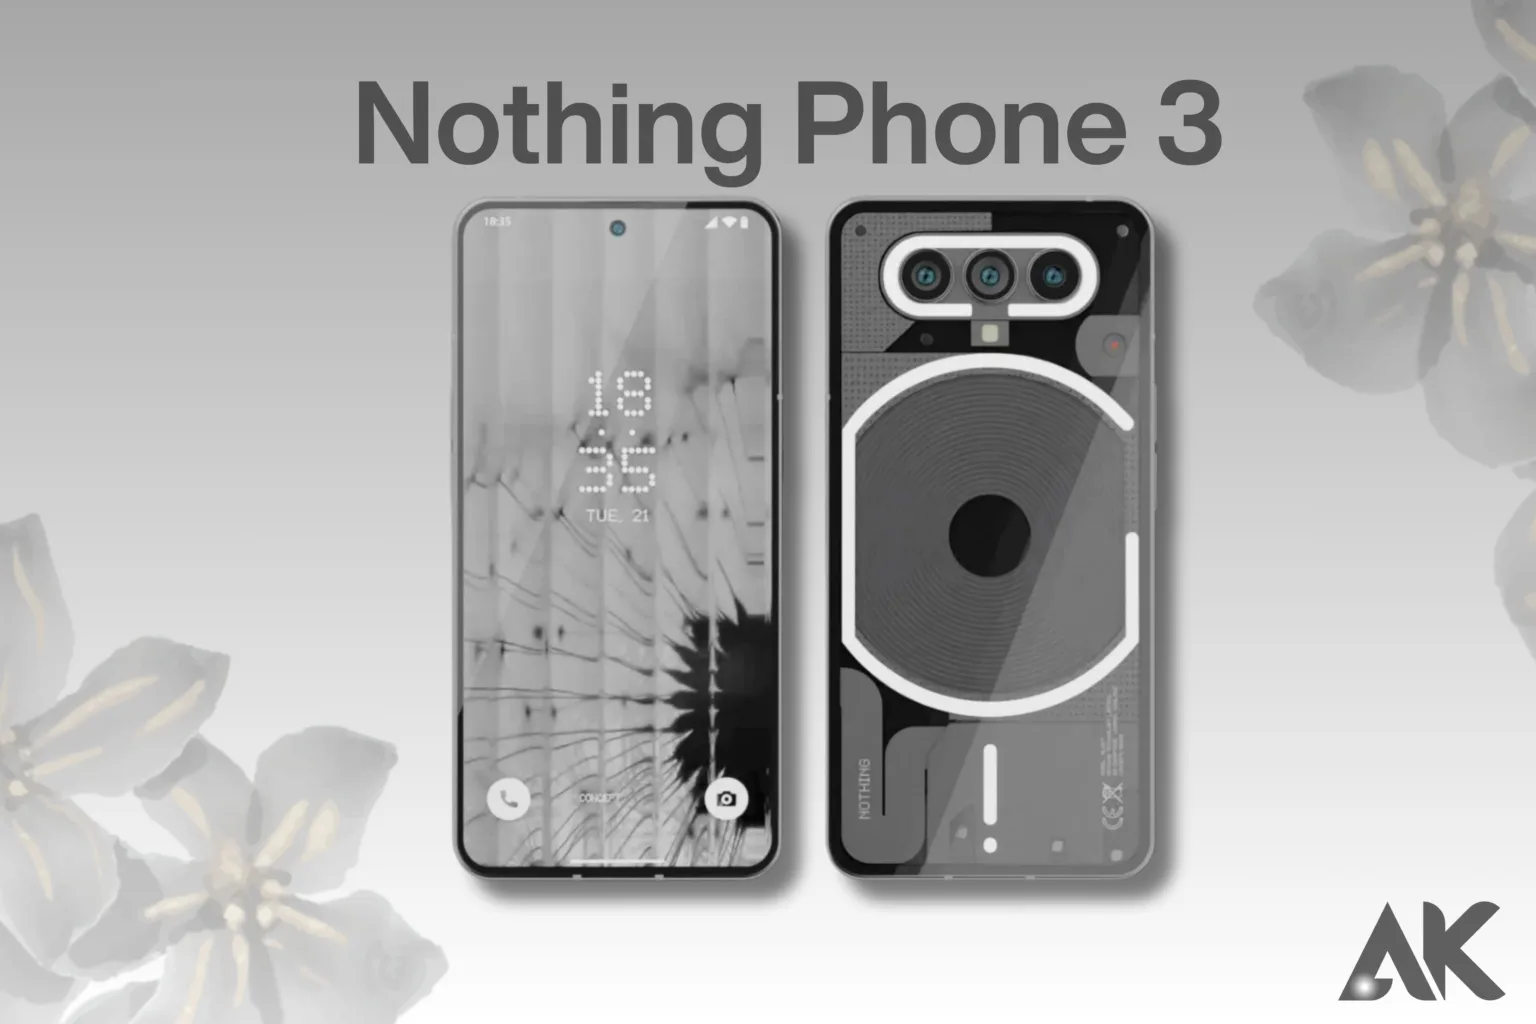 Discover the Innovative Nothing Phone 3 - Cutting-Edge Design and Features